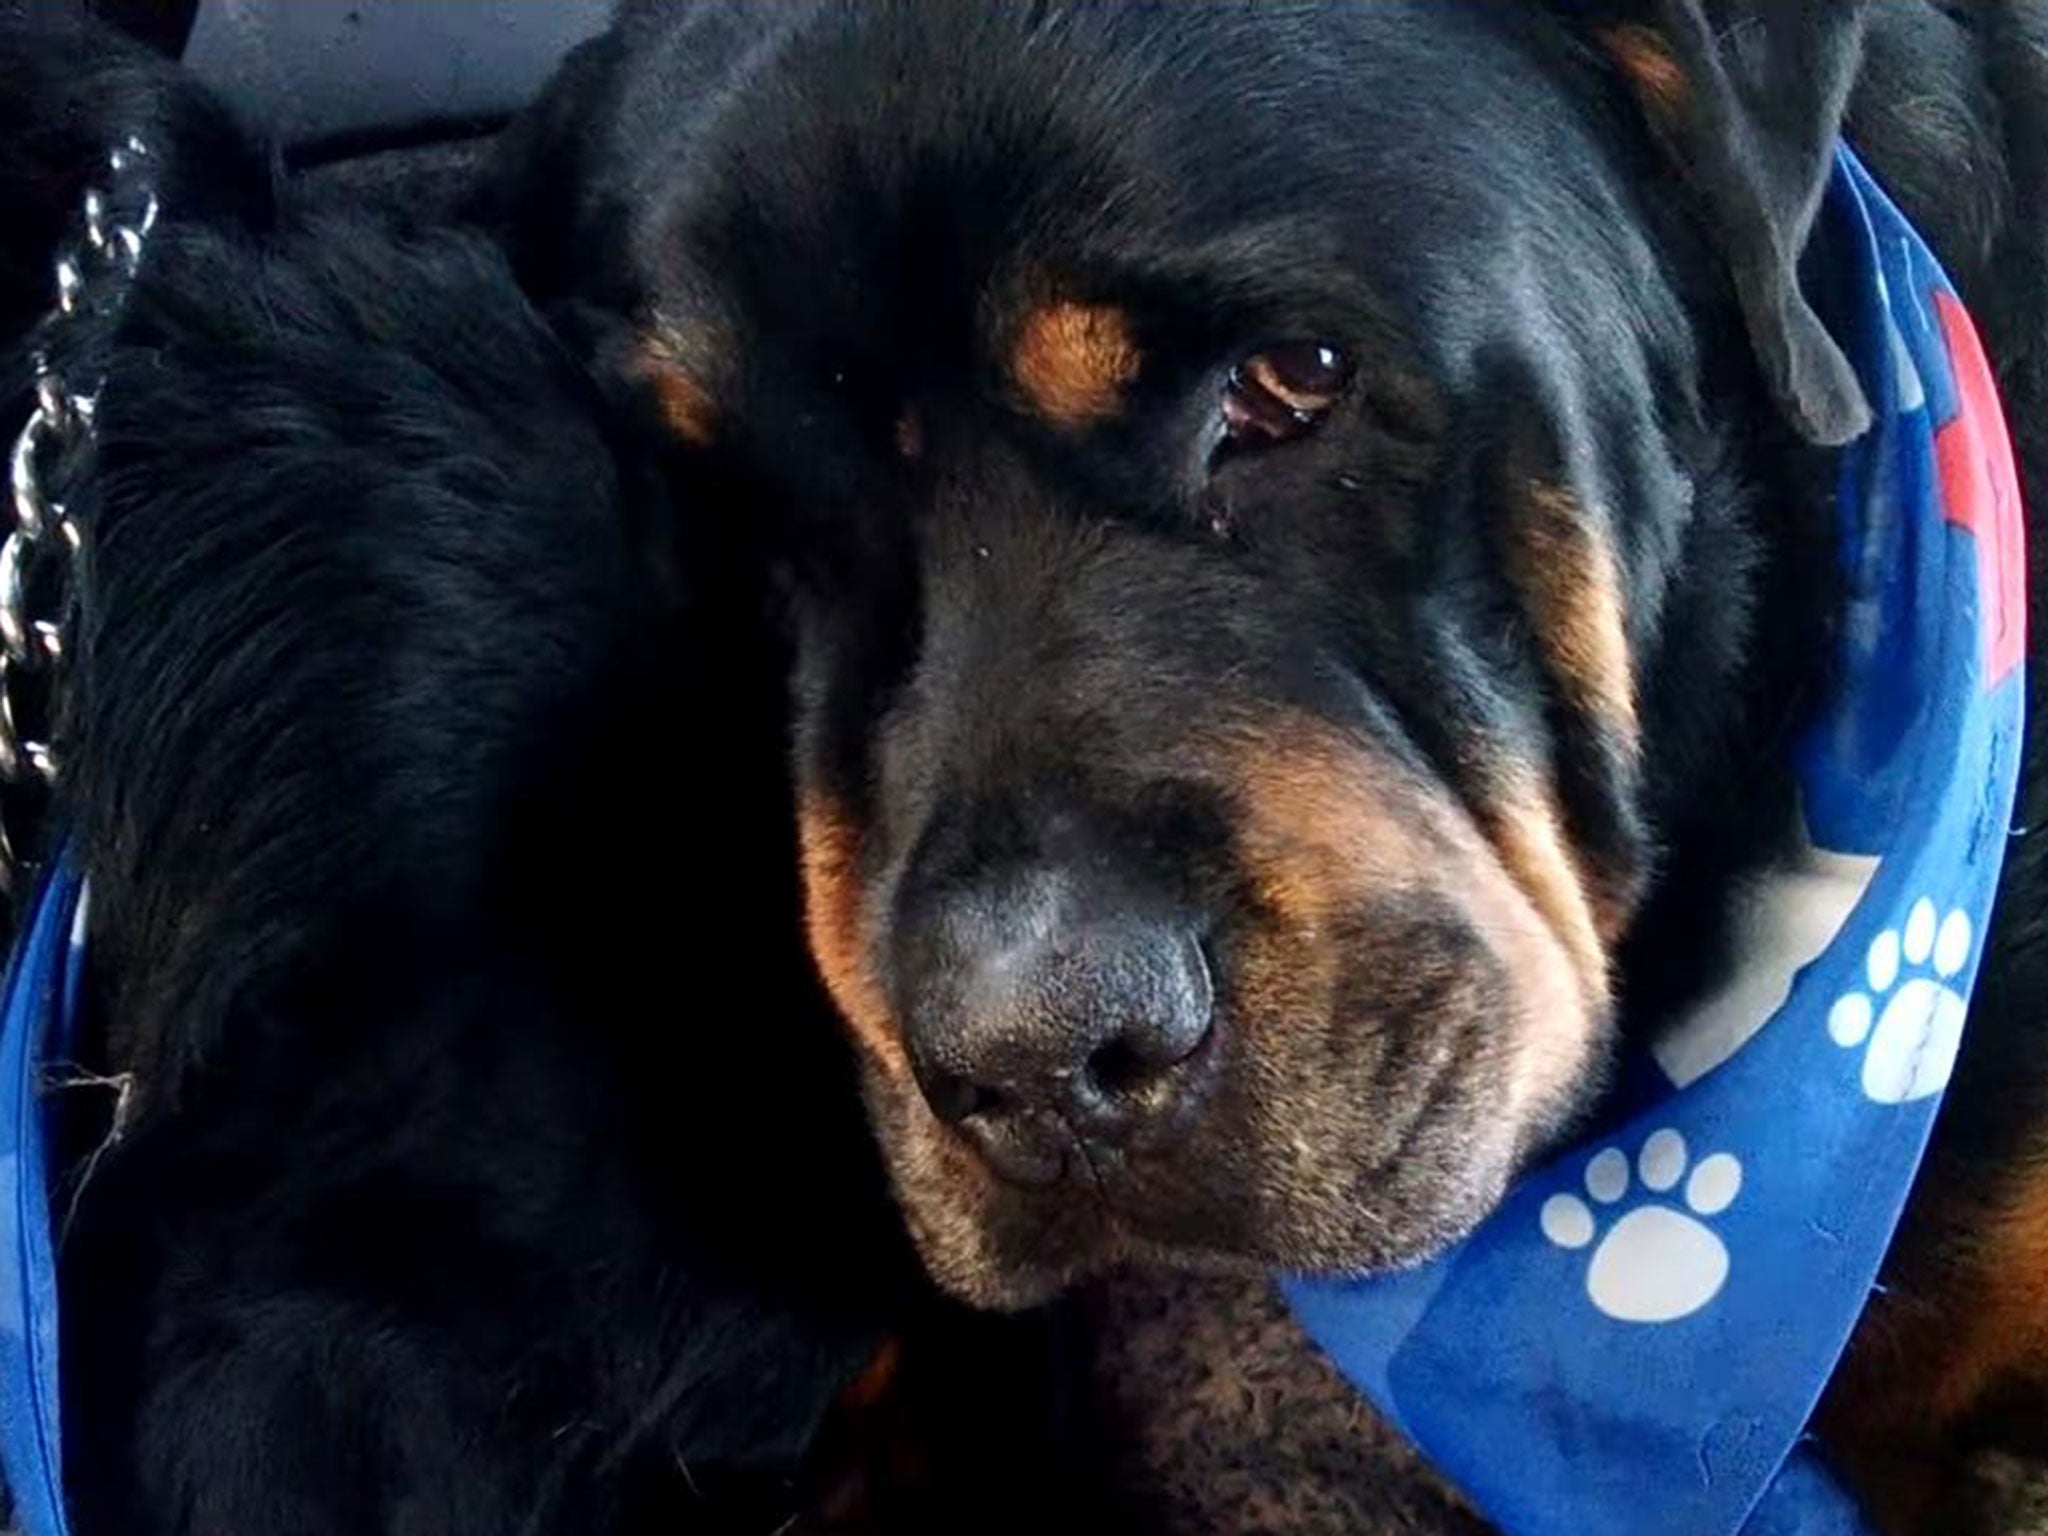 The owner of the Rottweiler claimed he was 'grieving' over his dead brother's body